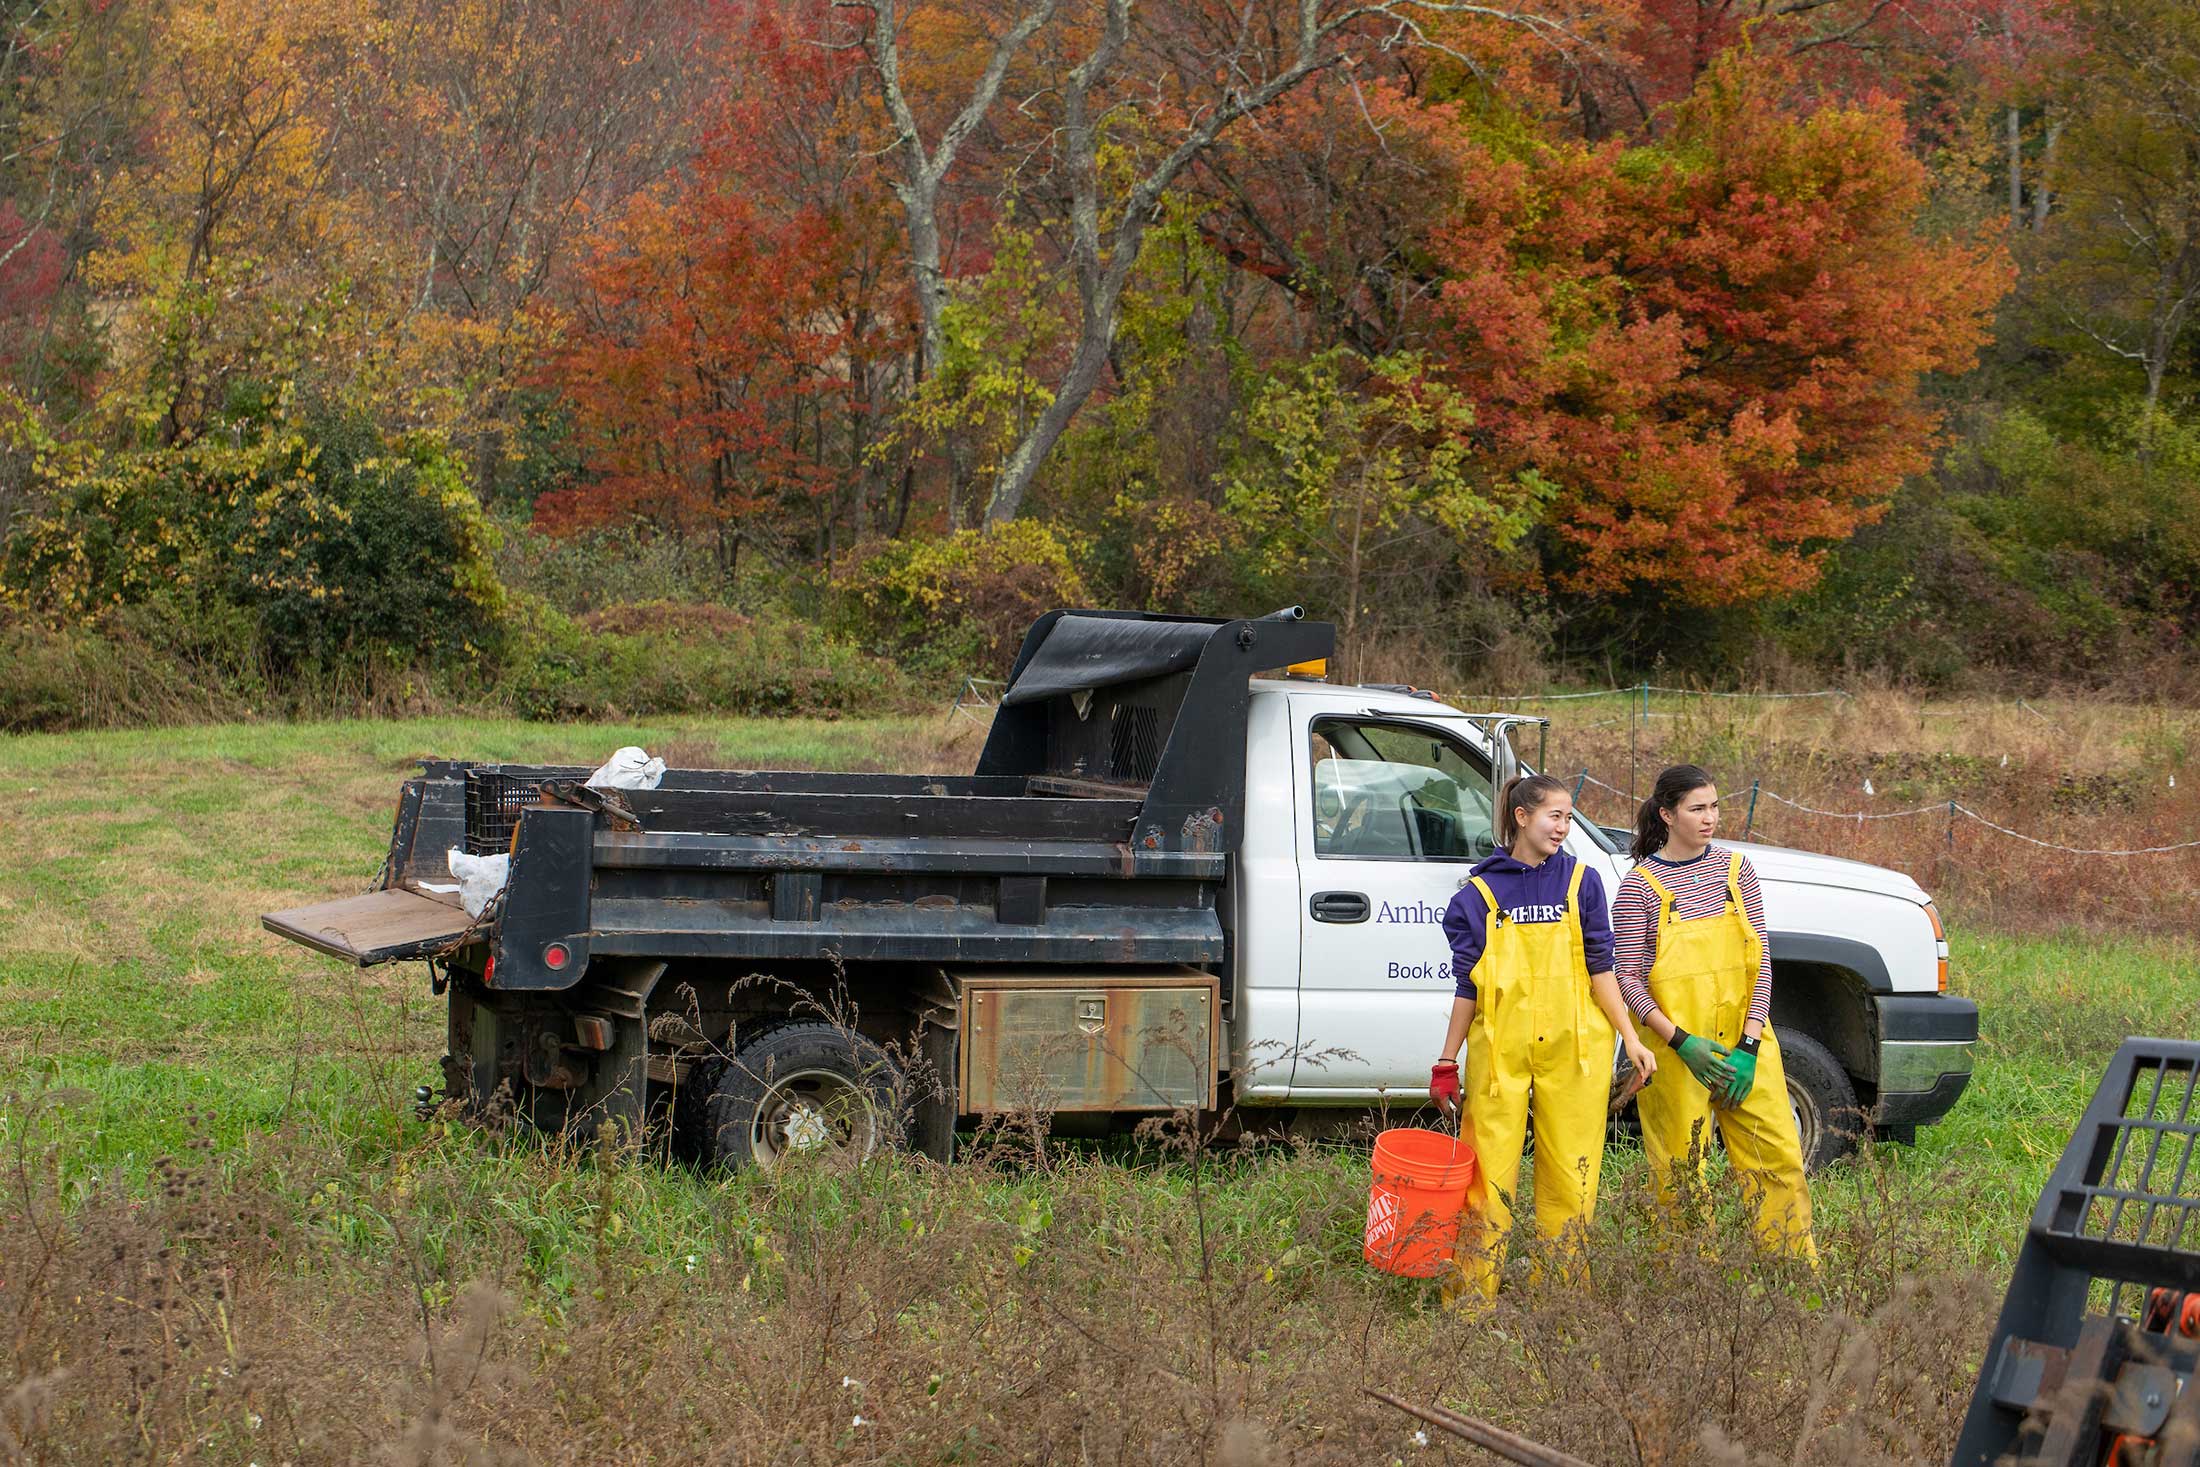 Two students stand in a field on the farm in front of a pickup truck.